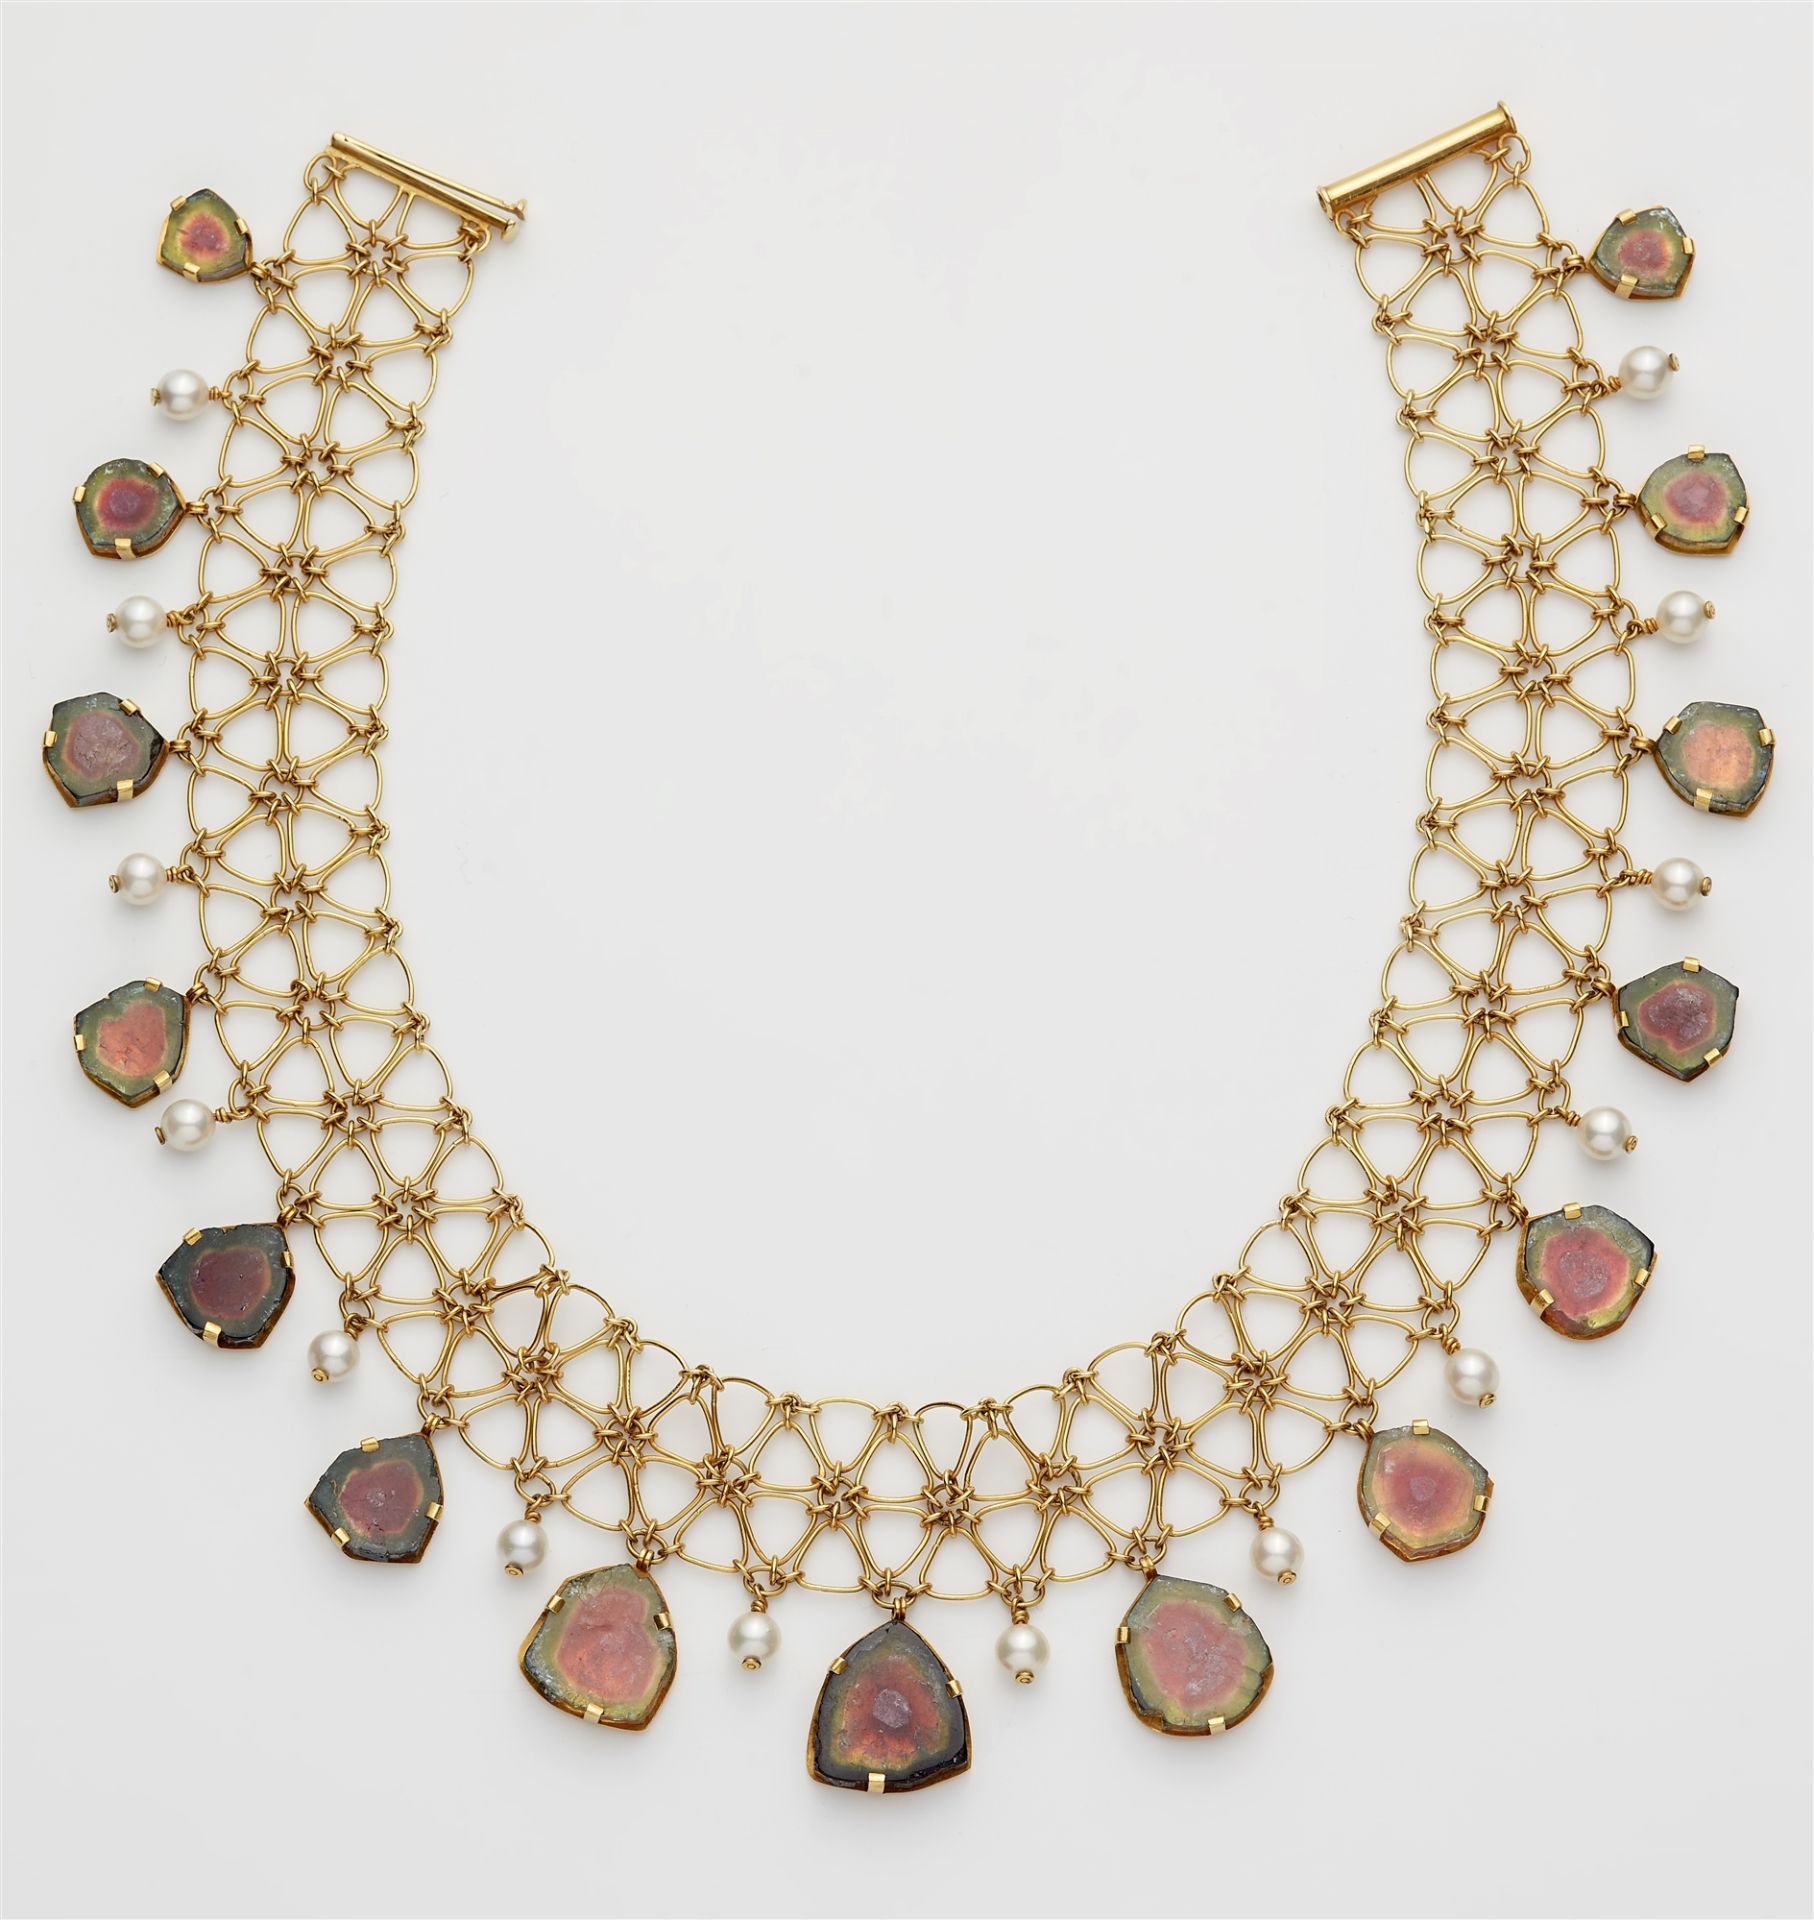 An 18k gold wire watermelon tourmaline and pearl fringe necklace.